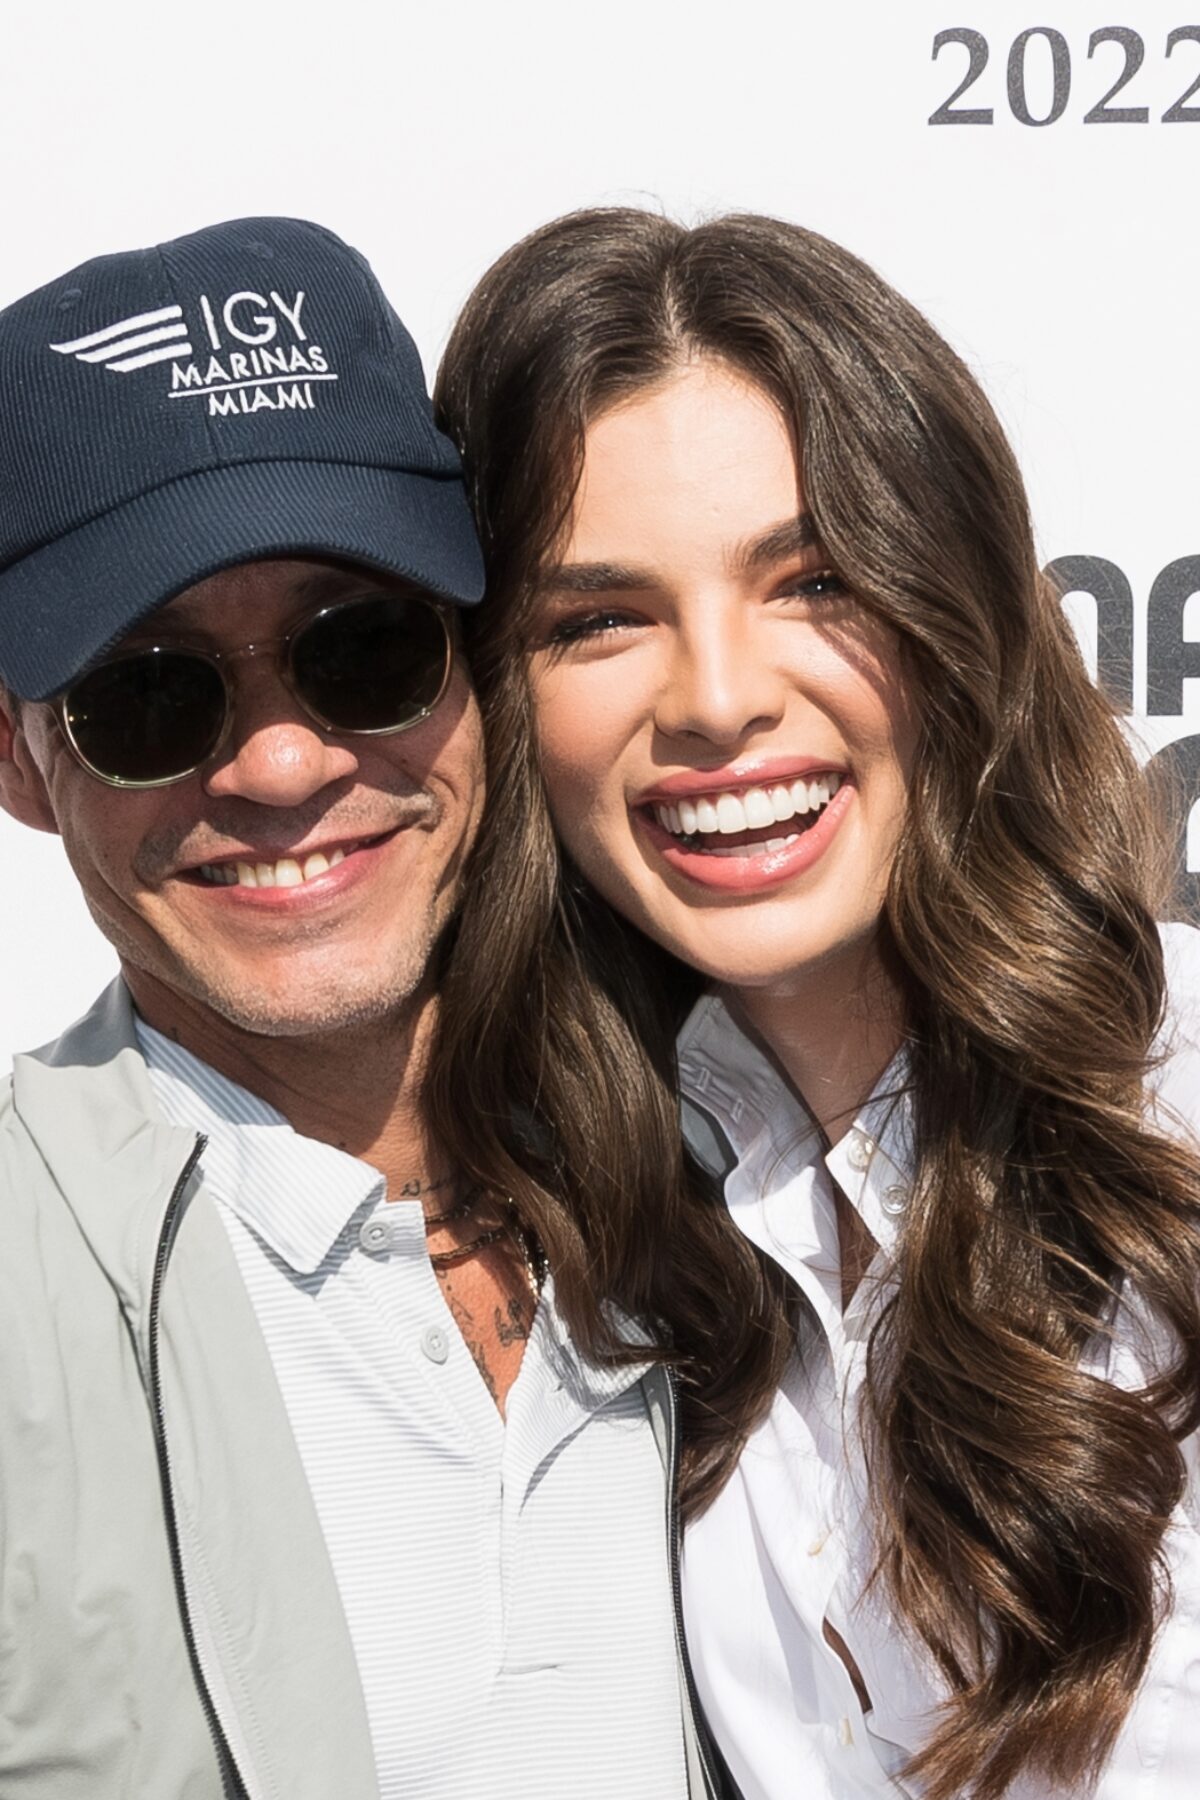 CORAL GABLES, FLORIDA - APRIL 05: (L-R) Marc Anthony and Nadia Ferreira attend the 2022 Maestro Cares Foundation's Celebrity Golf Tournament at Biltmore Hotel Miami-Coral Gables on April 05, 2022 in Coral Gables, Florida. (Photo by Jason Koerner/Getty Images)